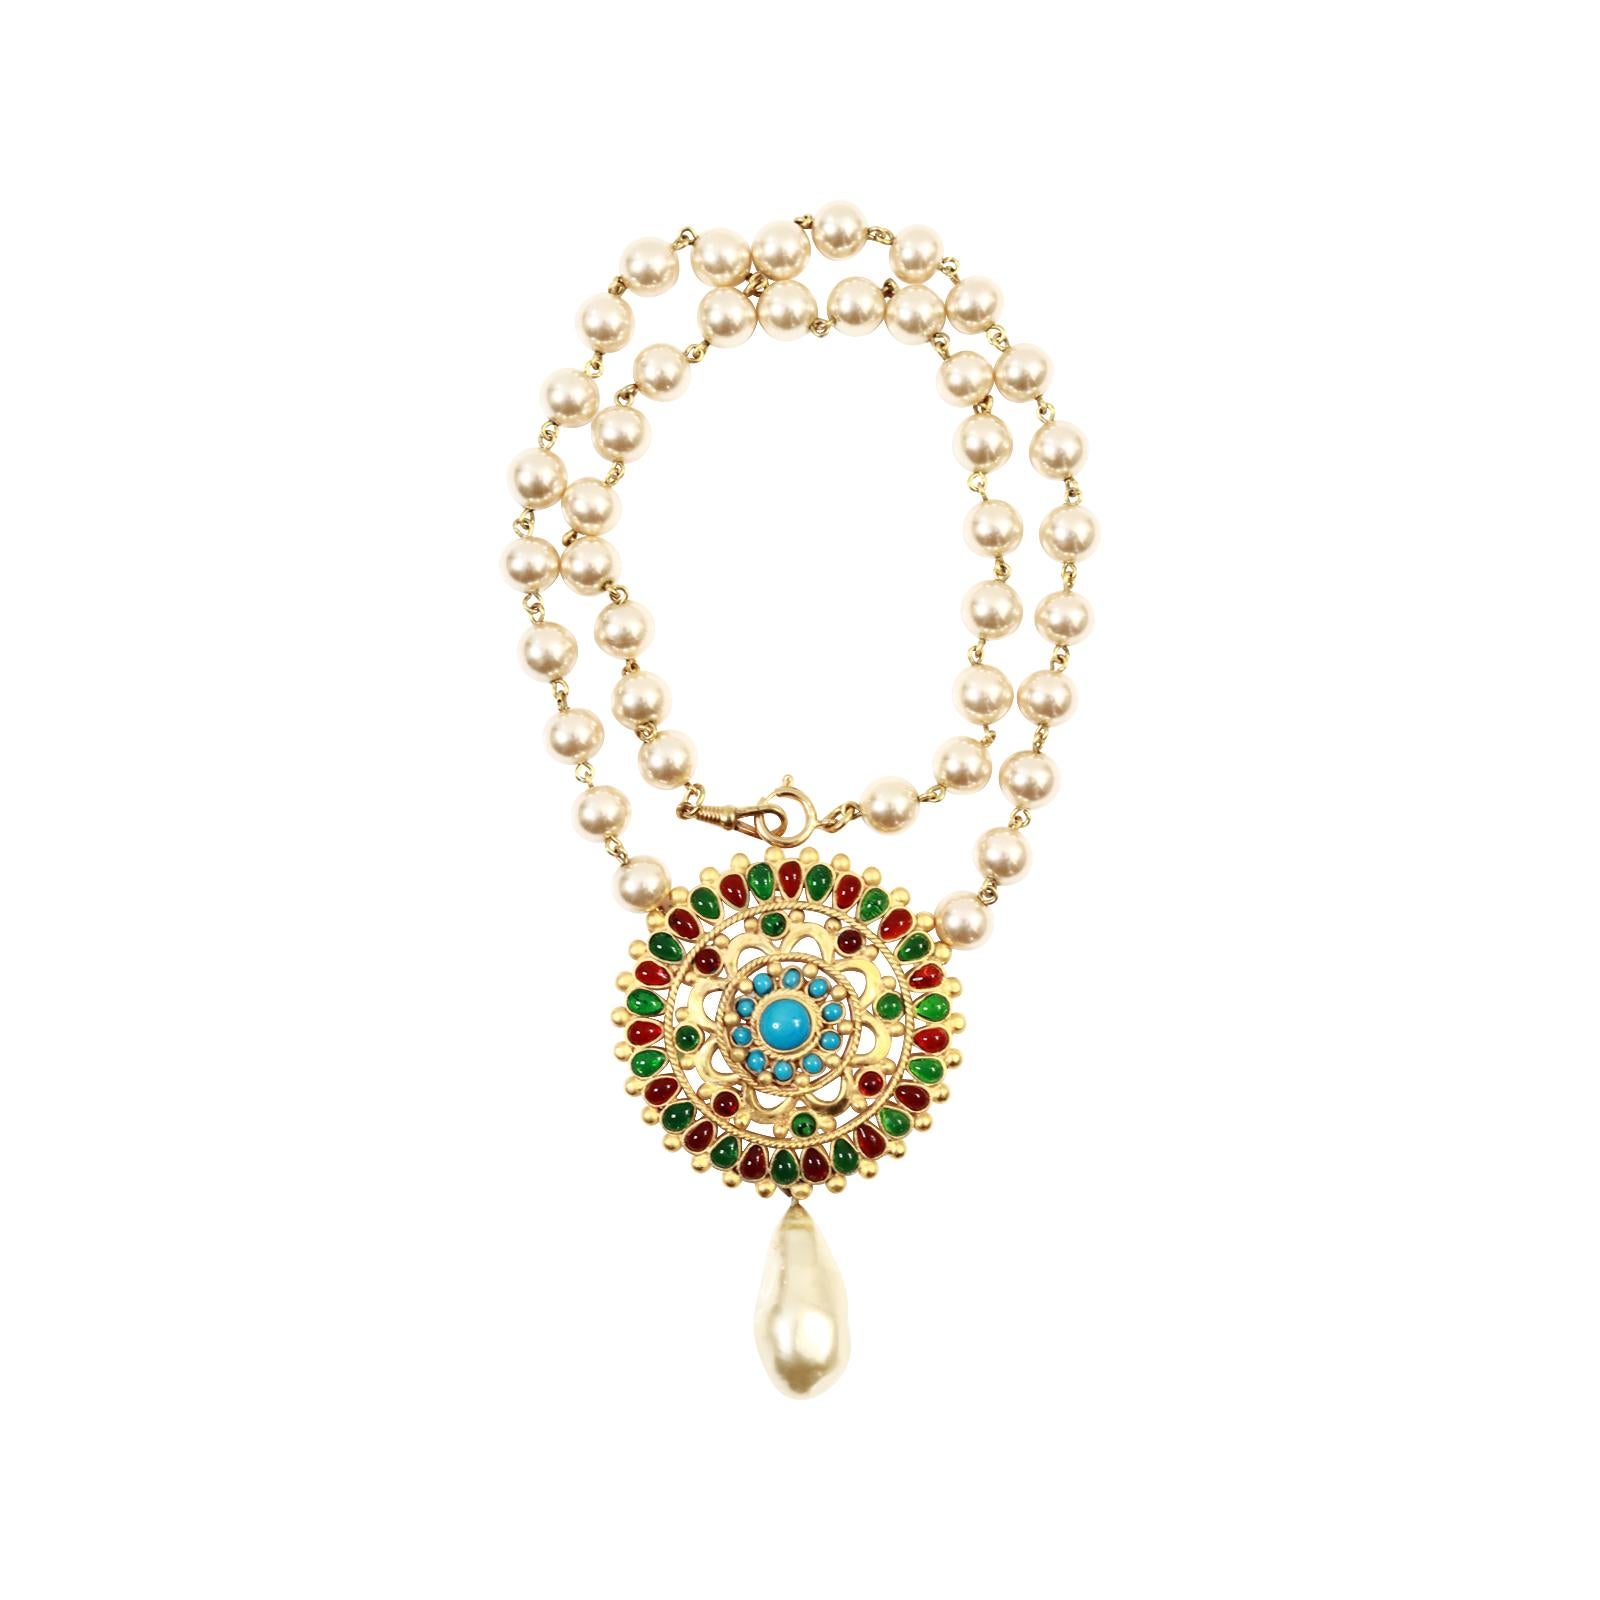 Maison Gripoix Vintage Necklace with Multi Color Dangling Pearl.  Pearl Necklace with Gripoix Disc in Gold Color with Dangling Pearl. If you needed this longer a jeweler could easily add gold chain to lengthen it.

Guy de Maupassant wrote a famous